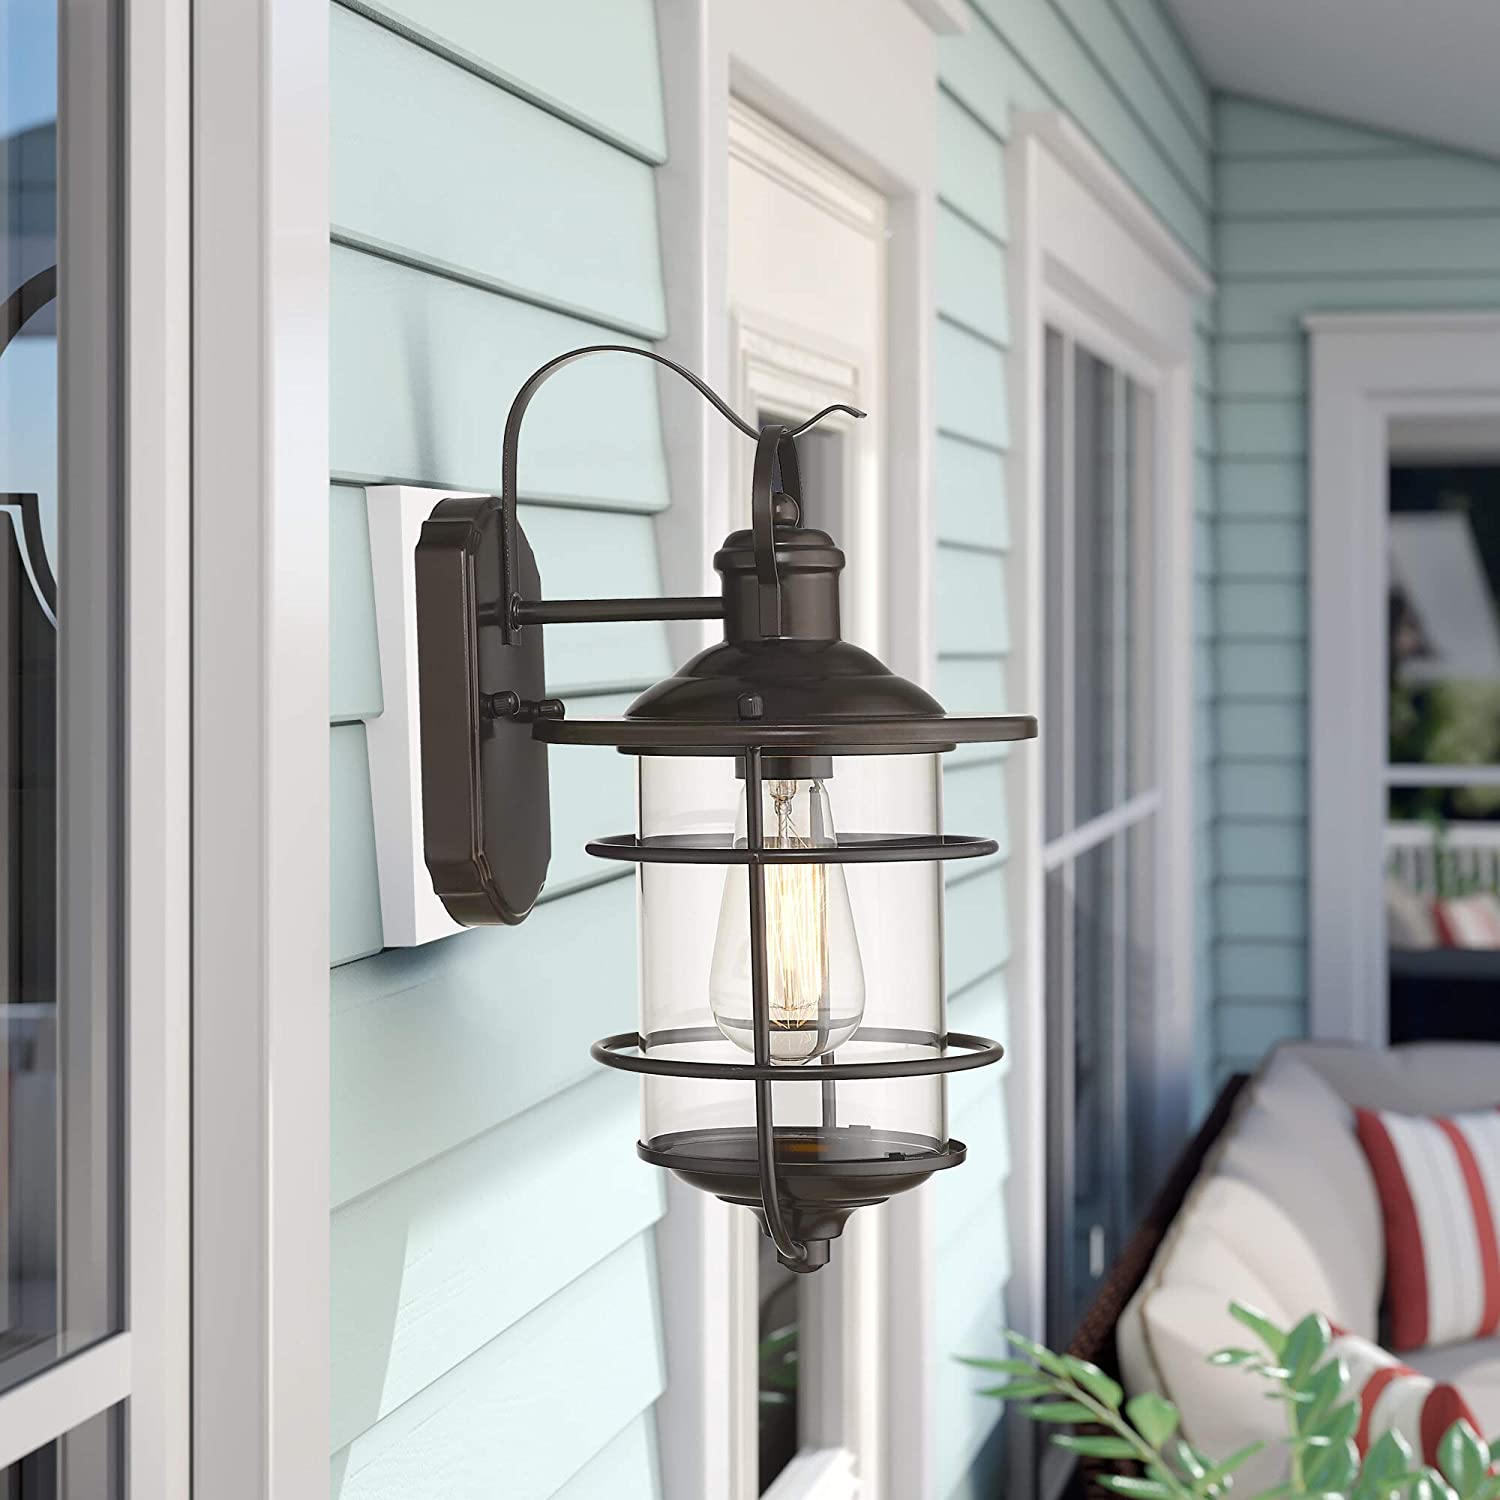 Oil rubbed bronze lanterns for outdoors exterior wall light fixture with glass shade